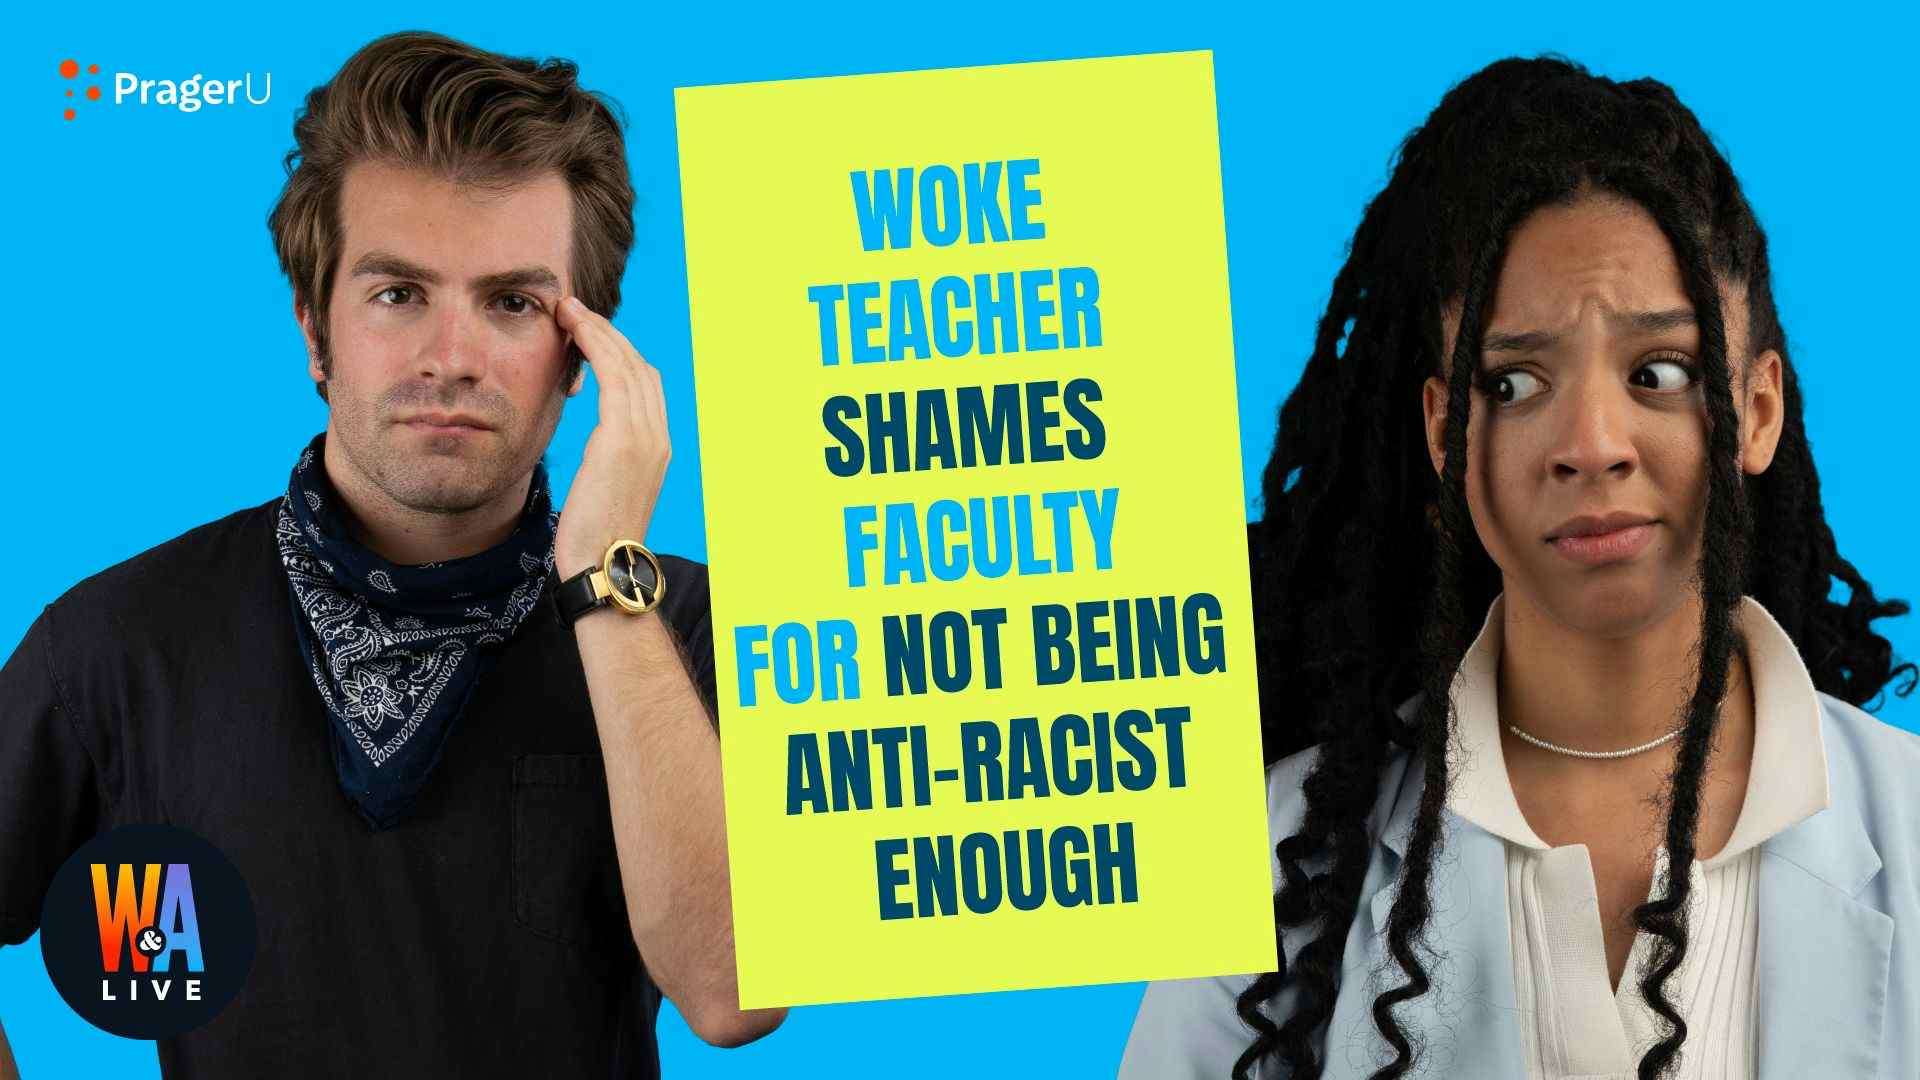 Woke Teacher Shames Faculty for Not Being Anti-Racist Enough